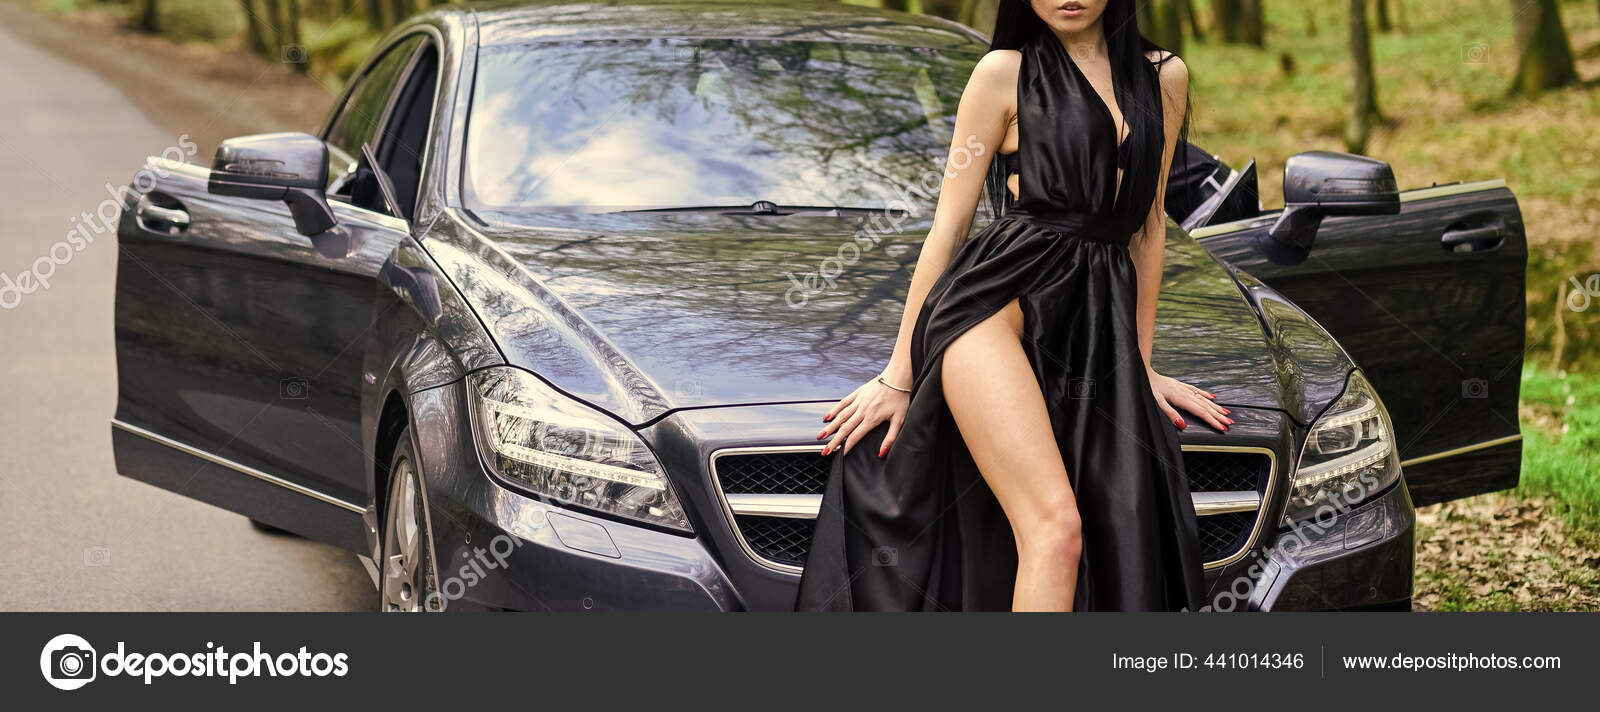 Seductive pose. Sex in car. Driver girl. Beauty and fashion. Woman in black dress escort service worker. Sexy girl elegant dress and auto. Provocative concept